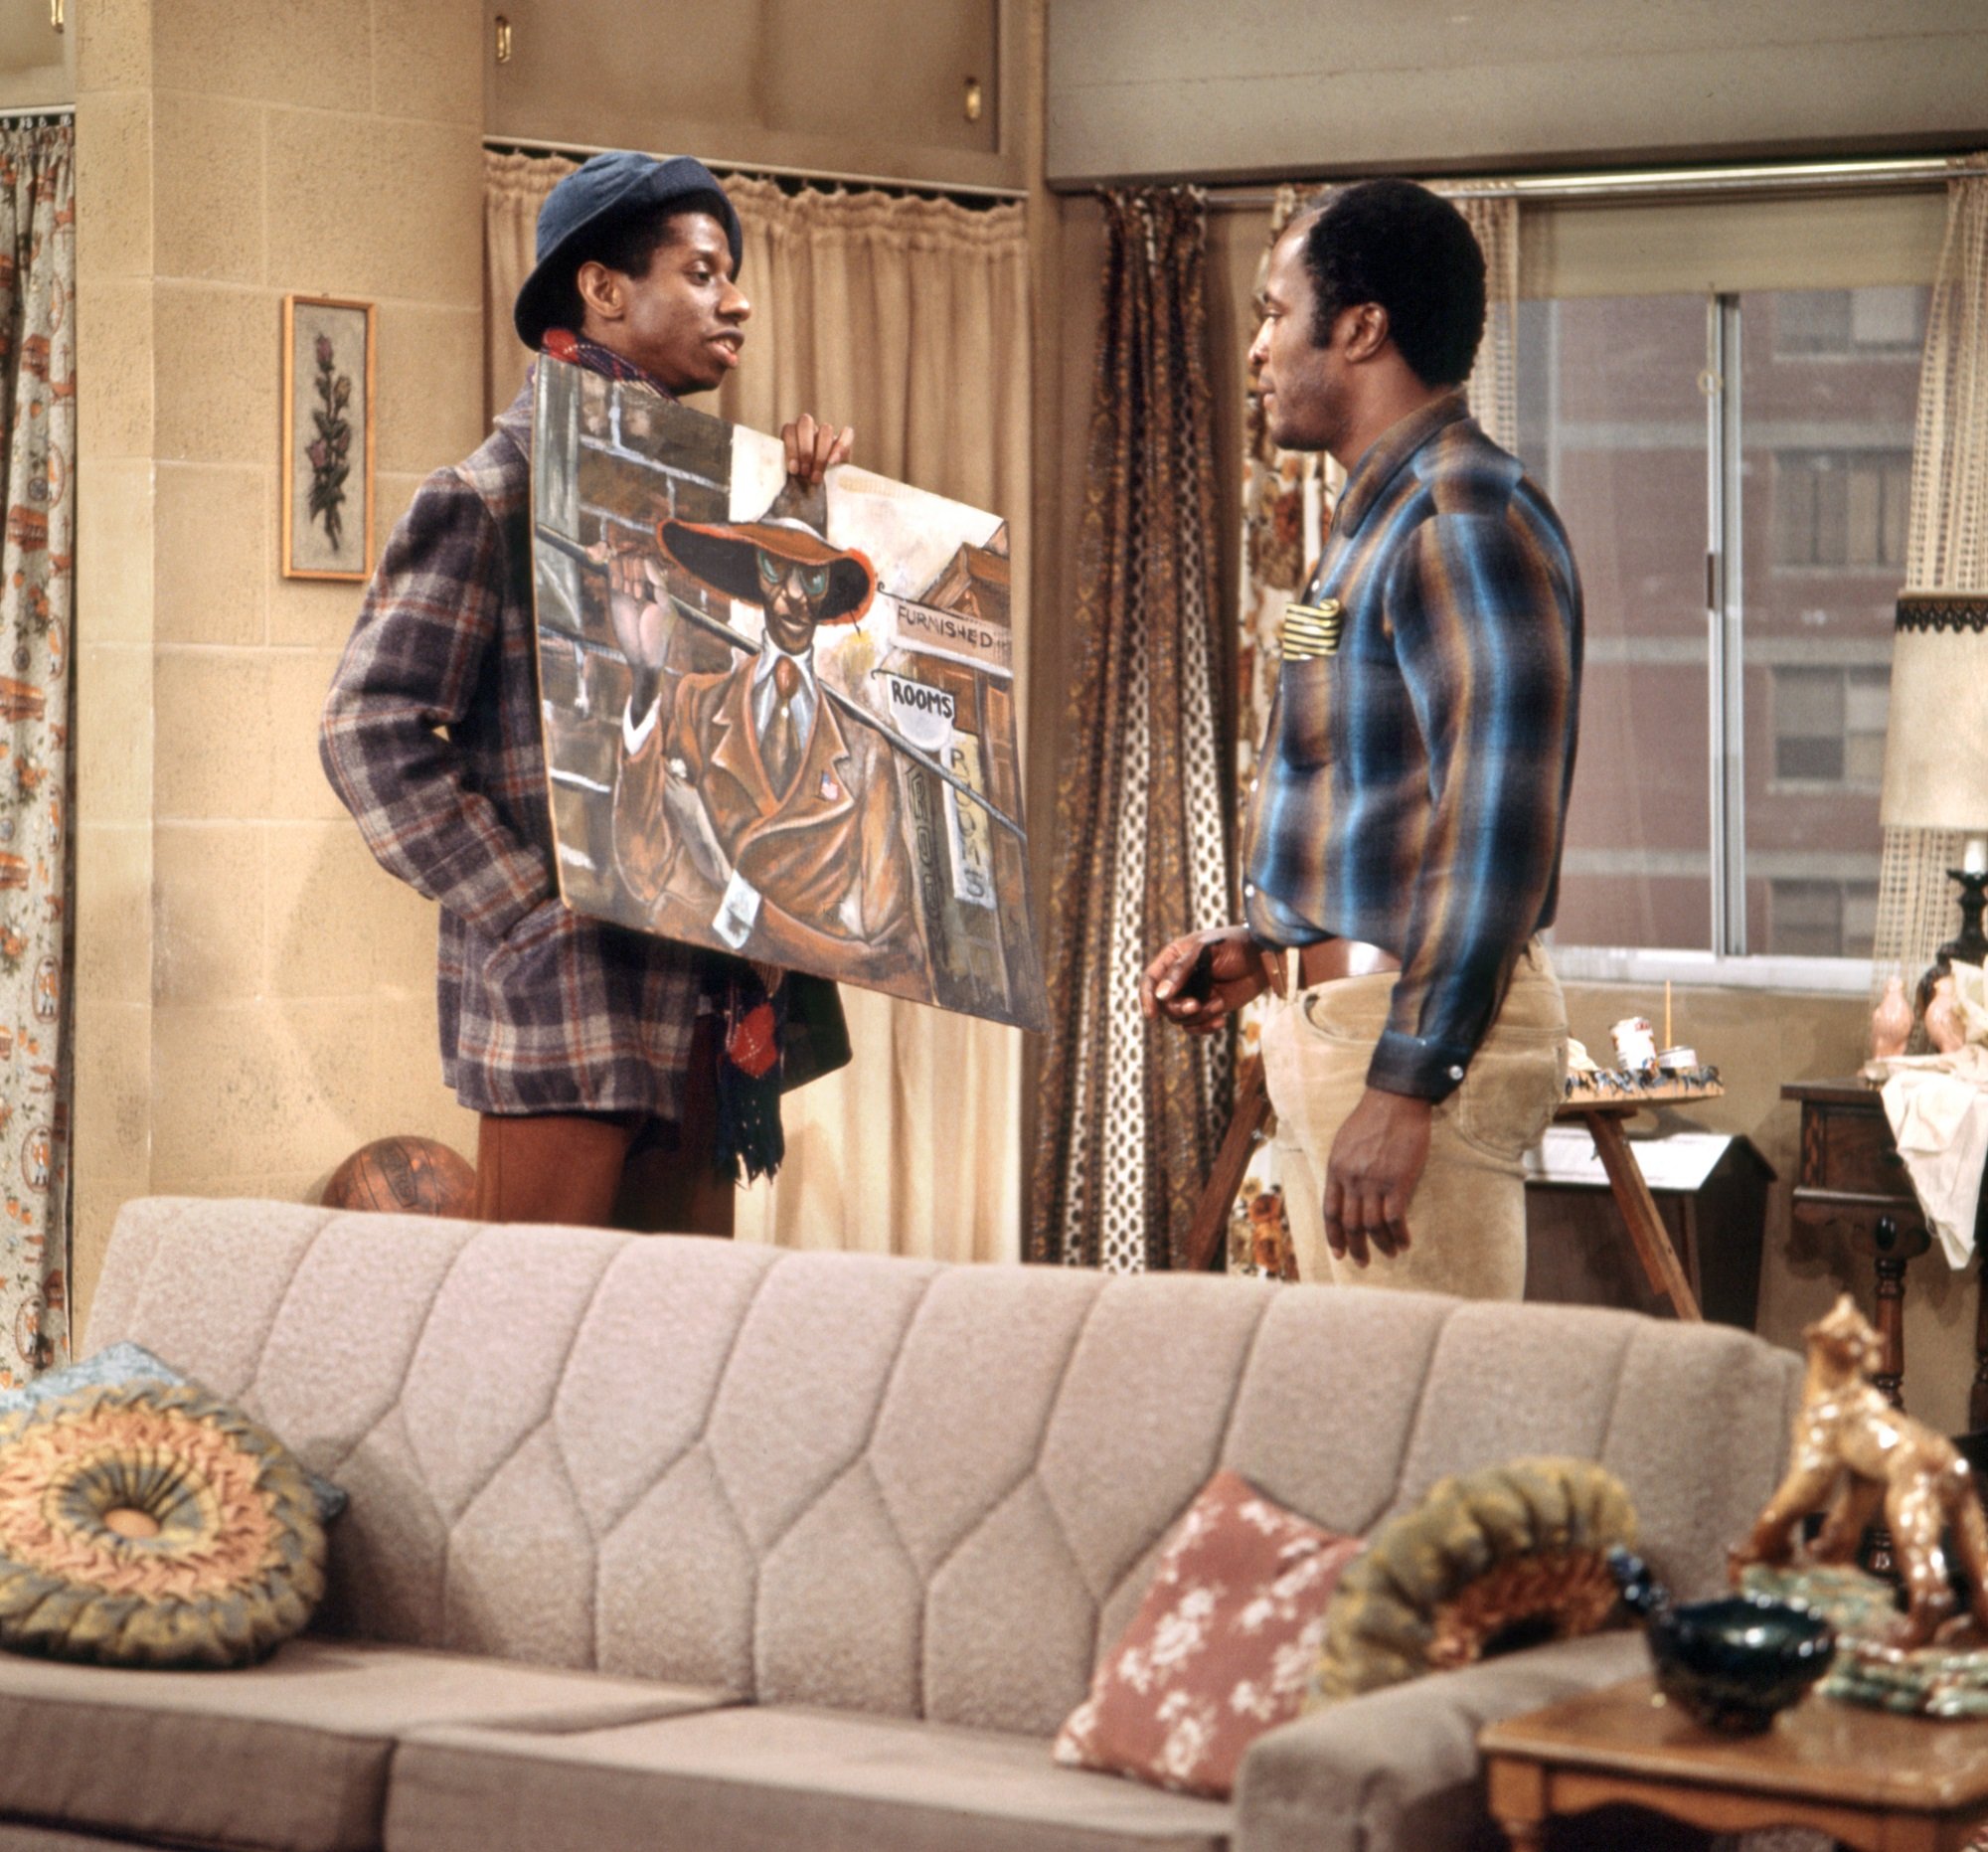 Jimmie Walker holds a painting in front of John Amos